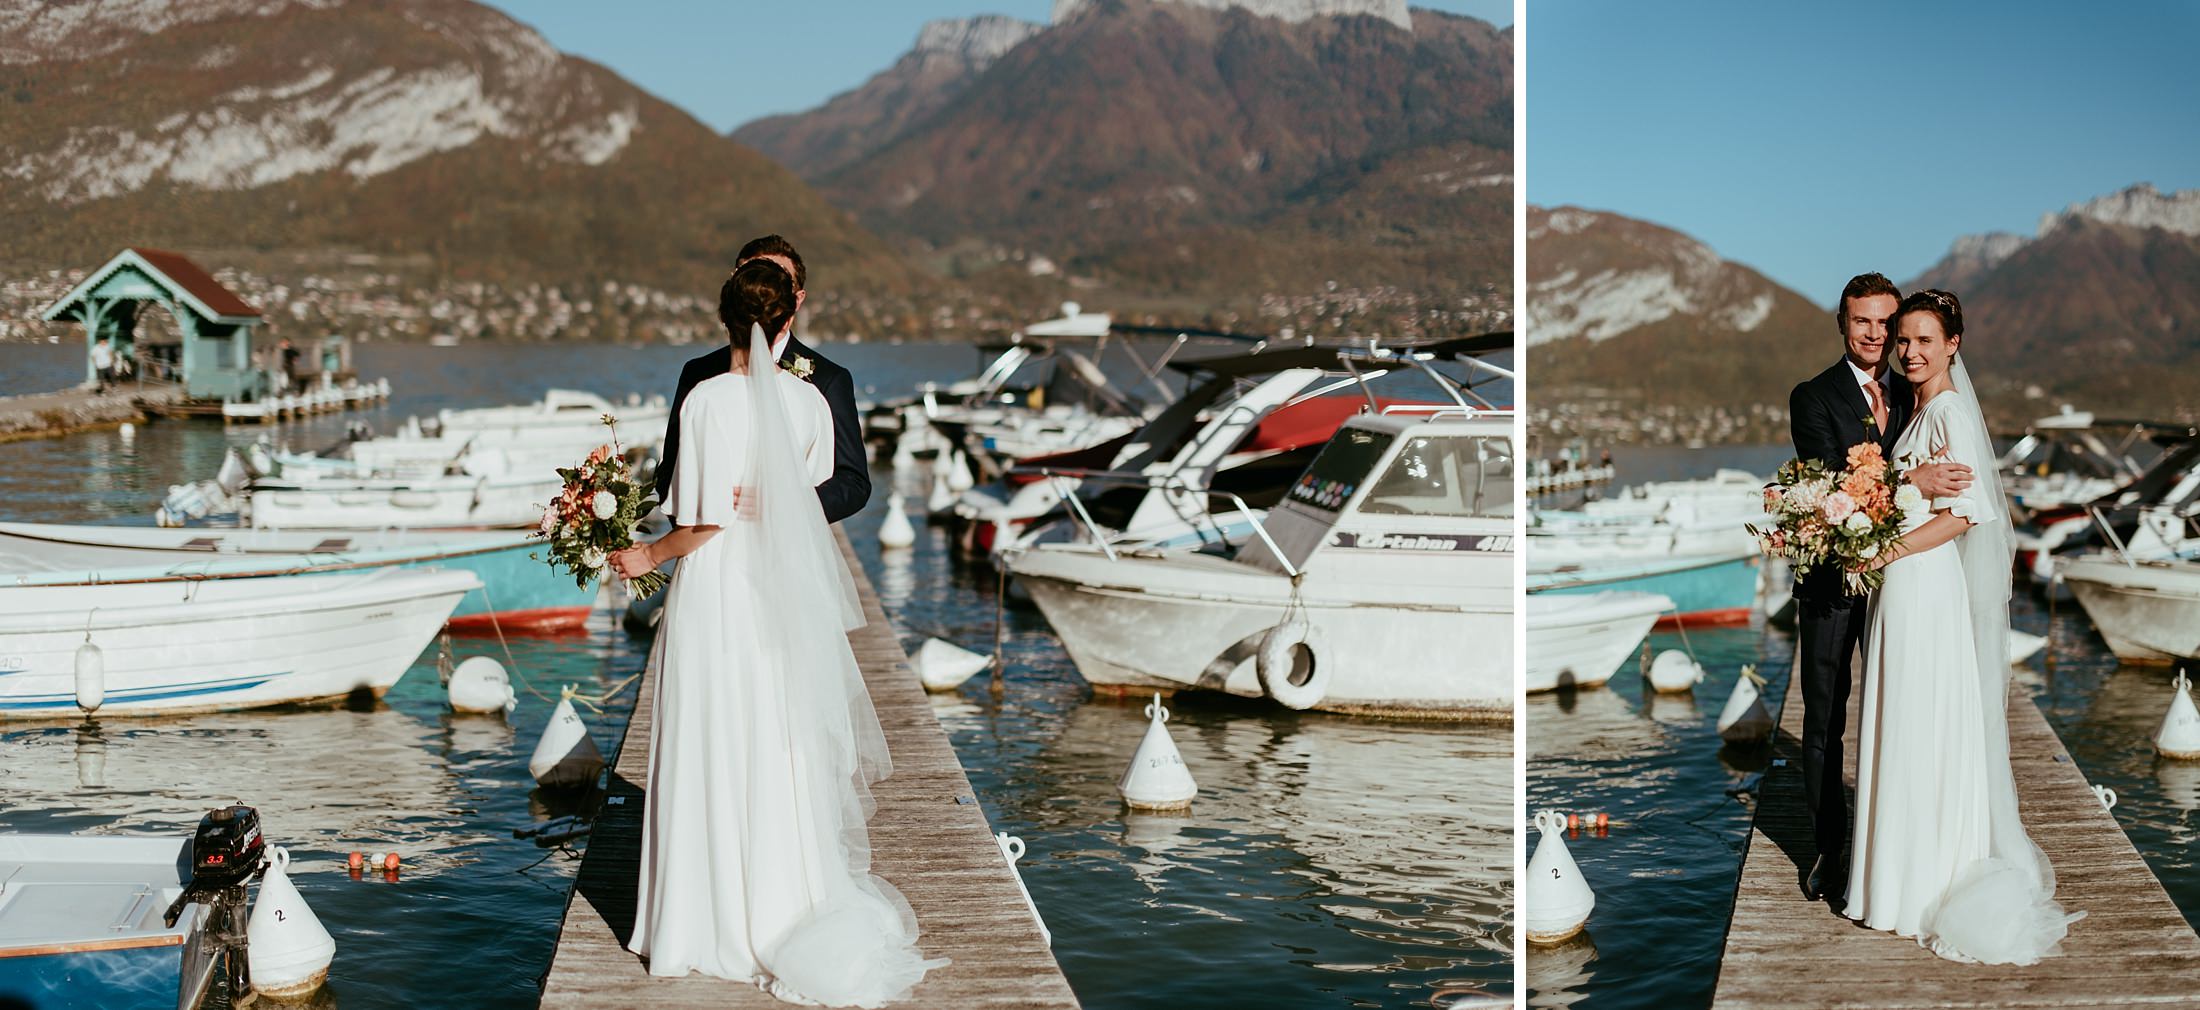 Charles SEGUY-Photographe Mariage Annecy-614